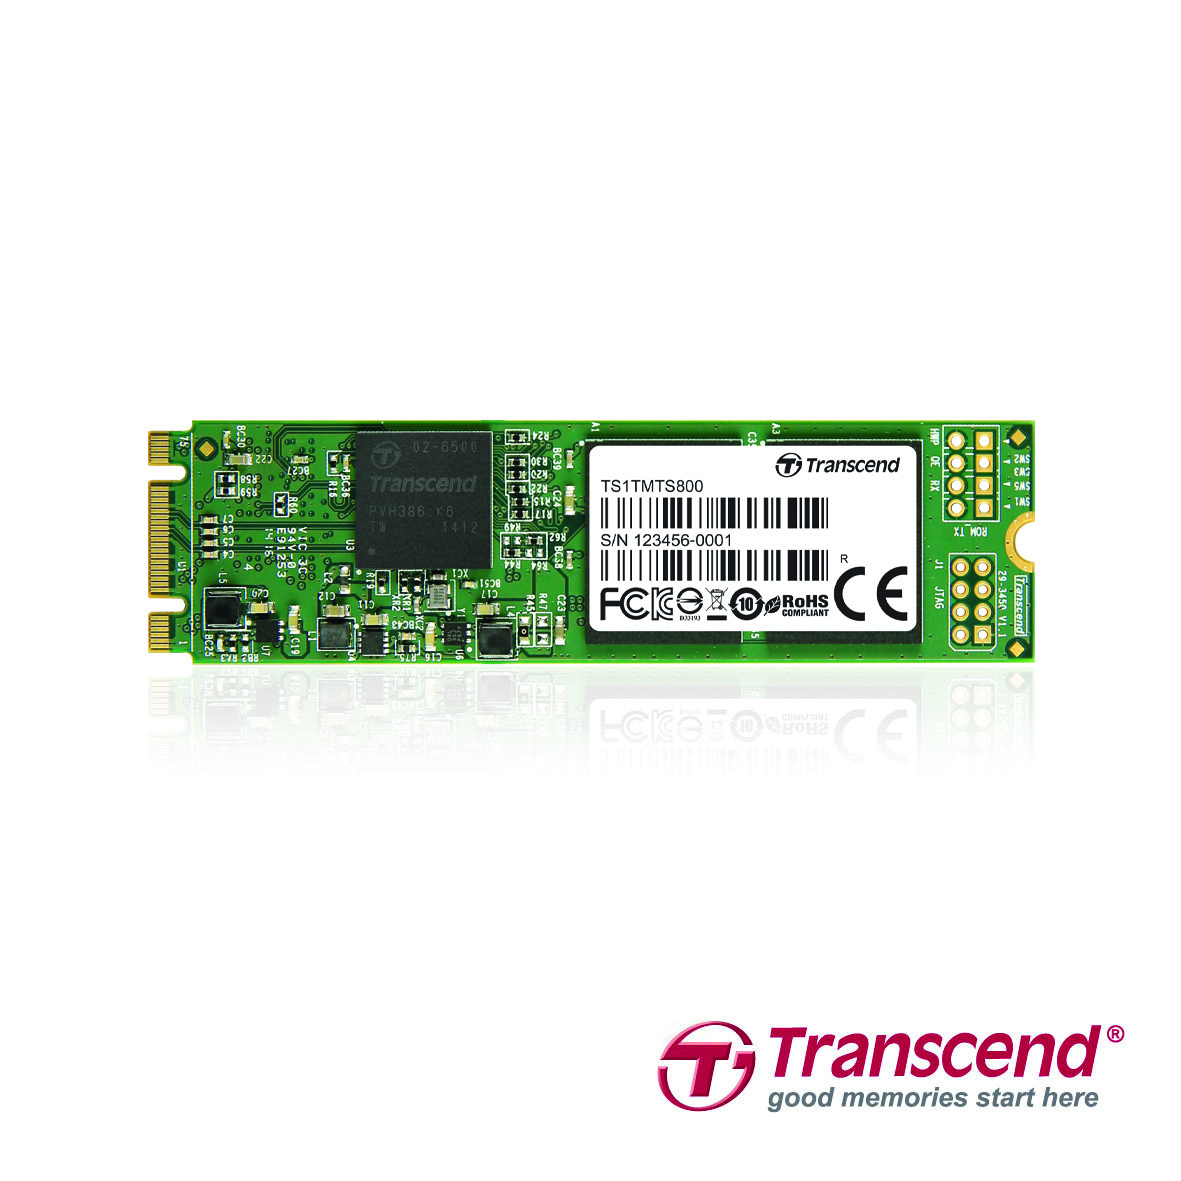 Media asset in full size related to 3dfxzone.it news item entitled as follows: Transcend introduce il drive SSD MTS800 M.2 con capacit di 1TB | Image Name: news23870_Transcend-MTS800-M.2-1TB_1.jpg